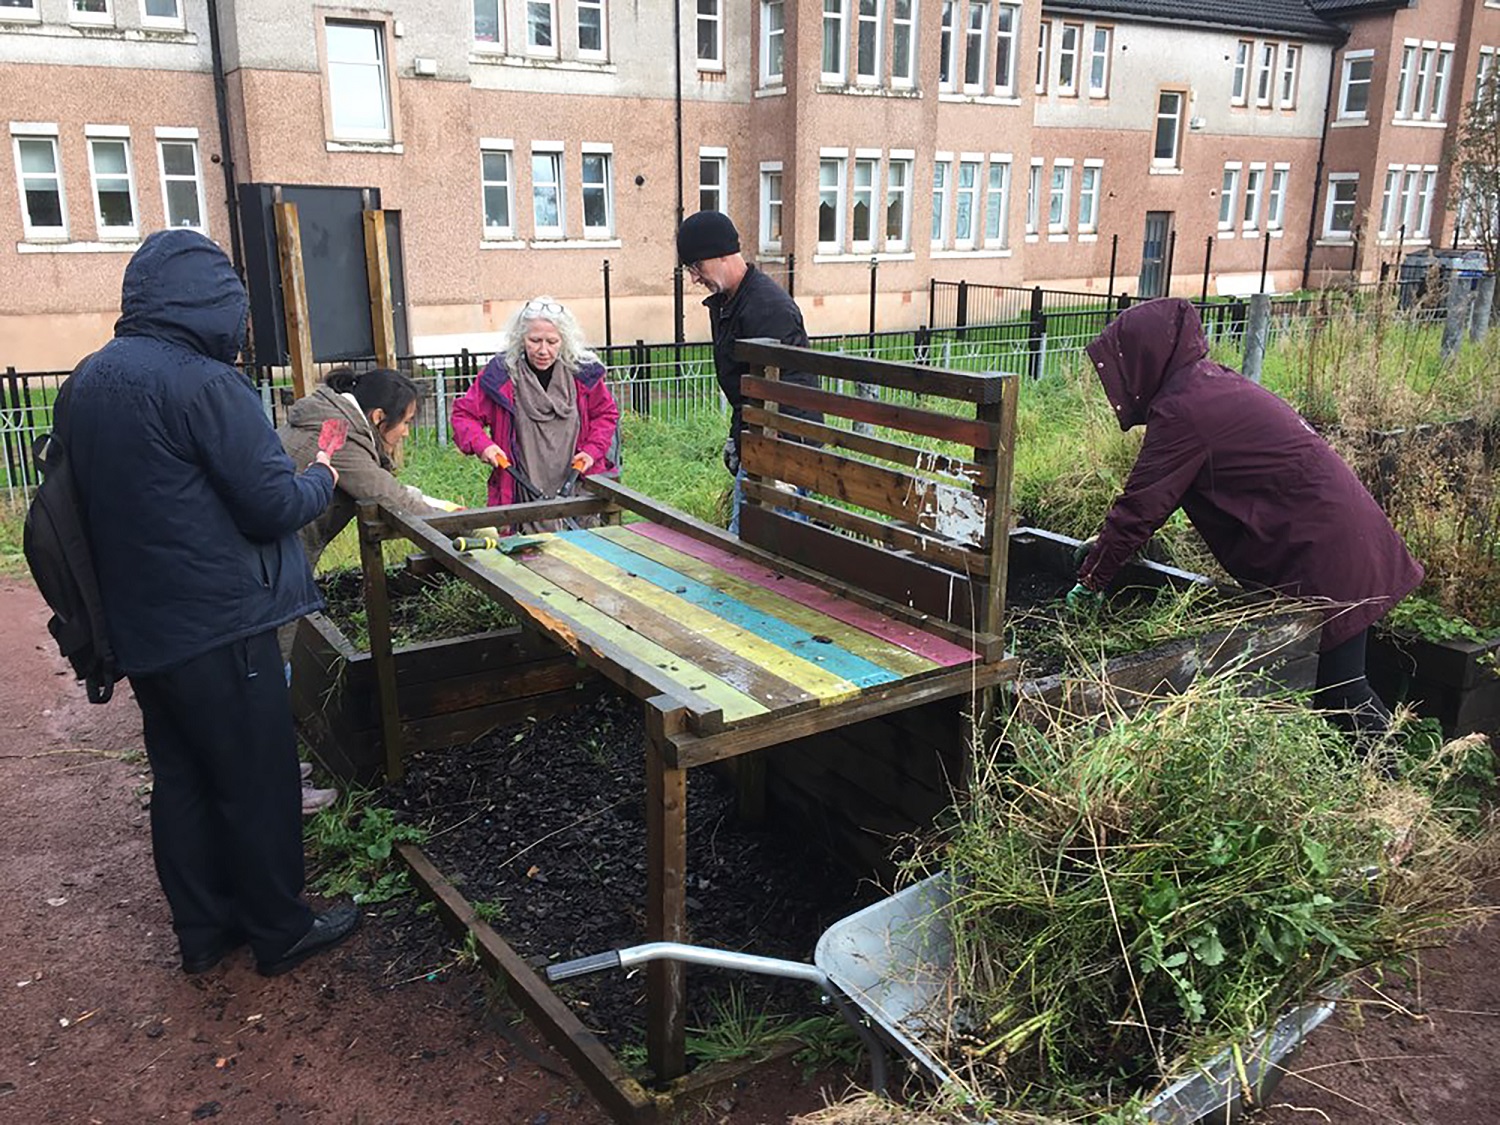 New community accessible park to benefit Glasgow community